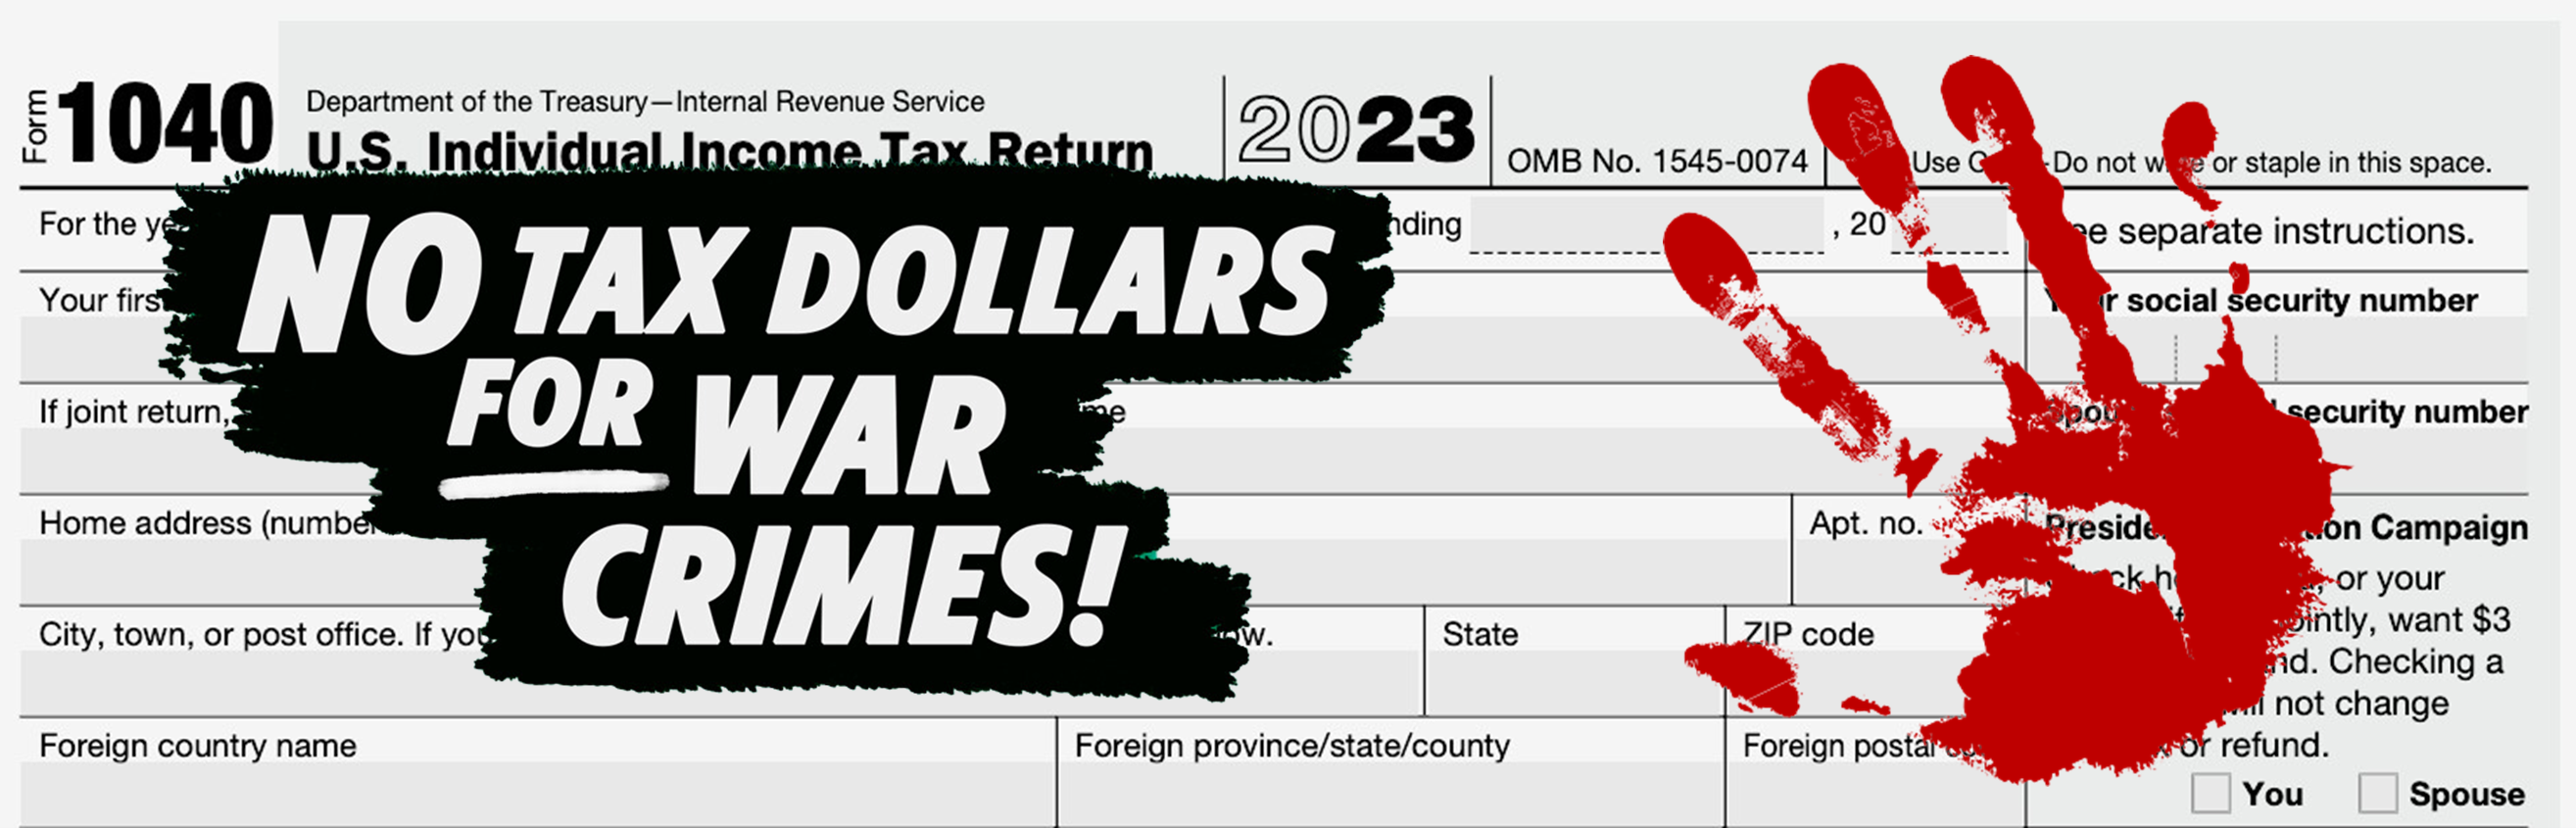 No Tax Dollars for War Crimes graphic